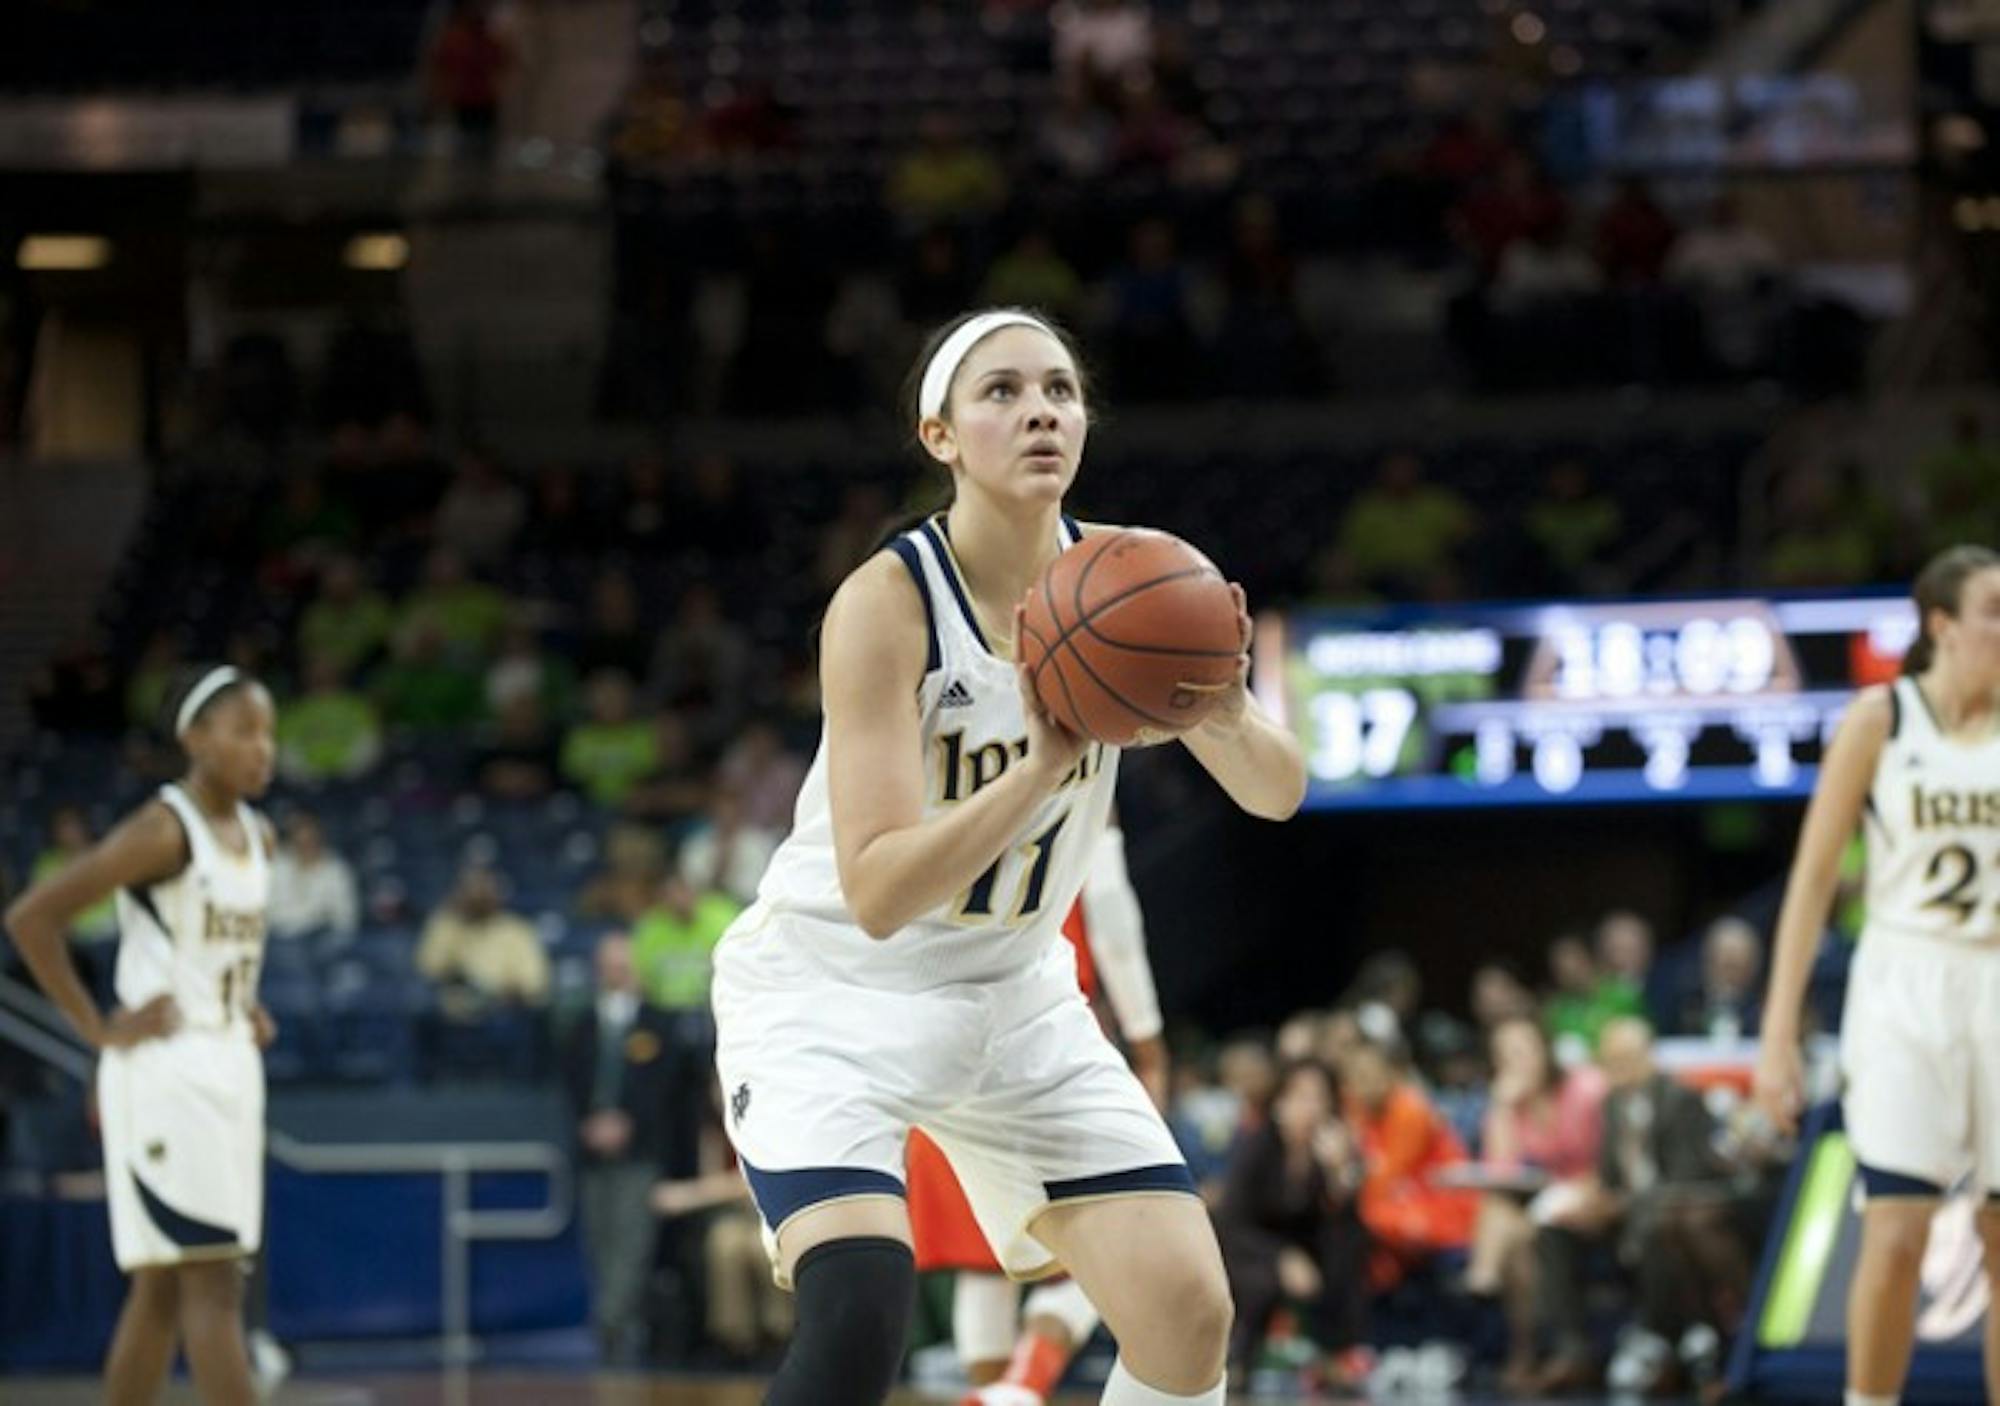 Former Irish forward Natalie Achonwa shoots a free throw during No. 2 Notre Dame’s 79-52 victory over Miami at Purcell Pavilion on Jan. 23, 2014.